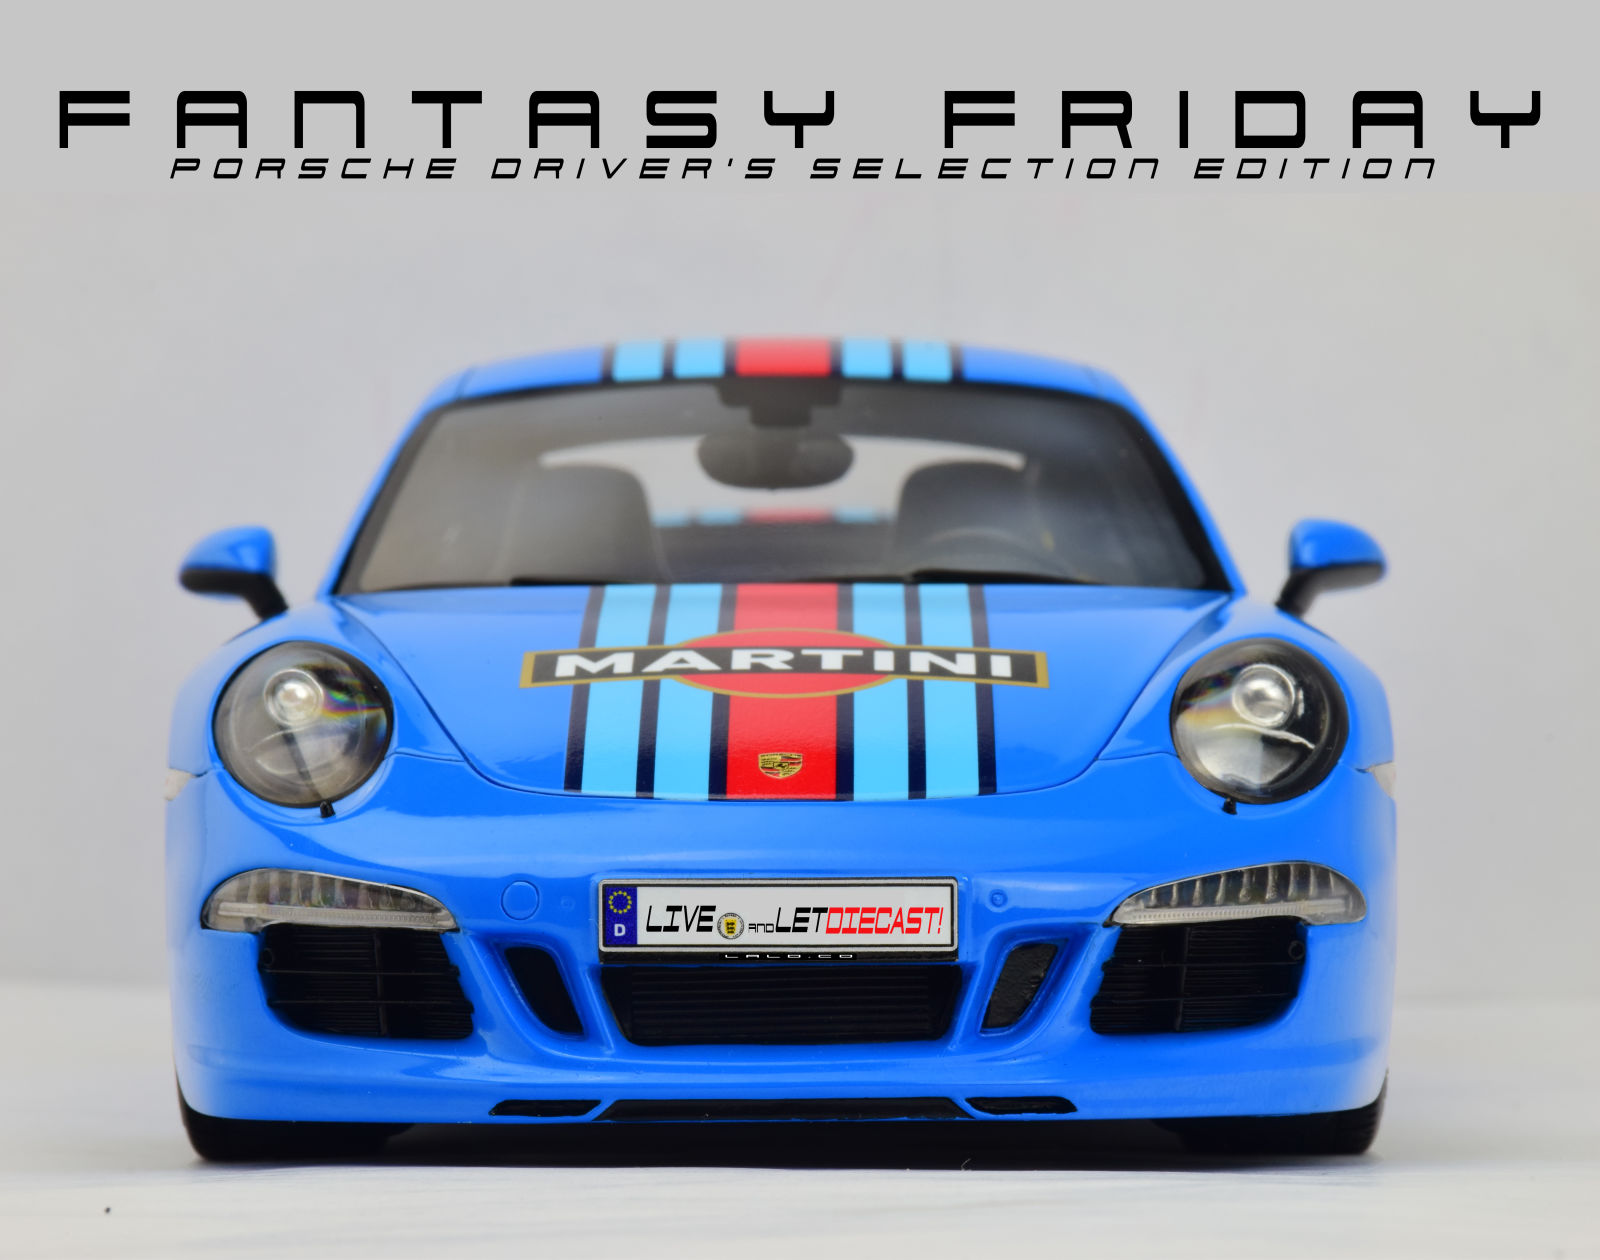 Illustration for article titled Fantasy Friday: Porsche Drivers Selection Edition